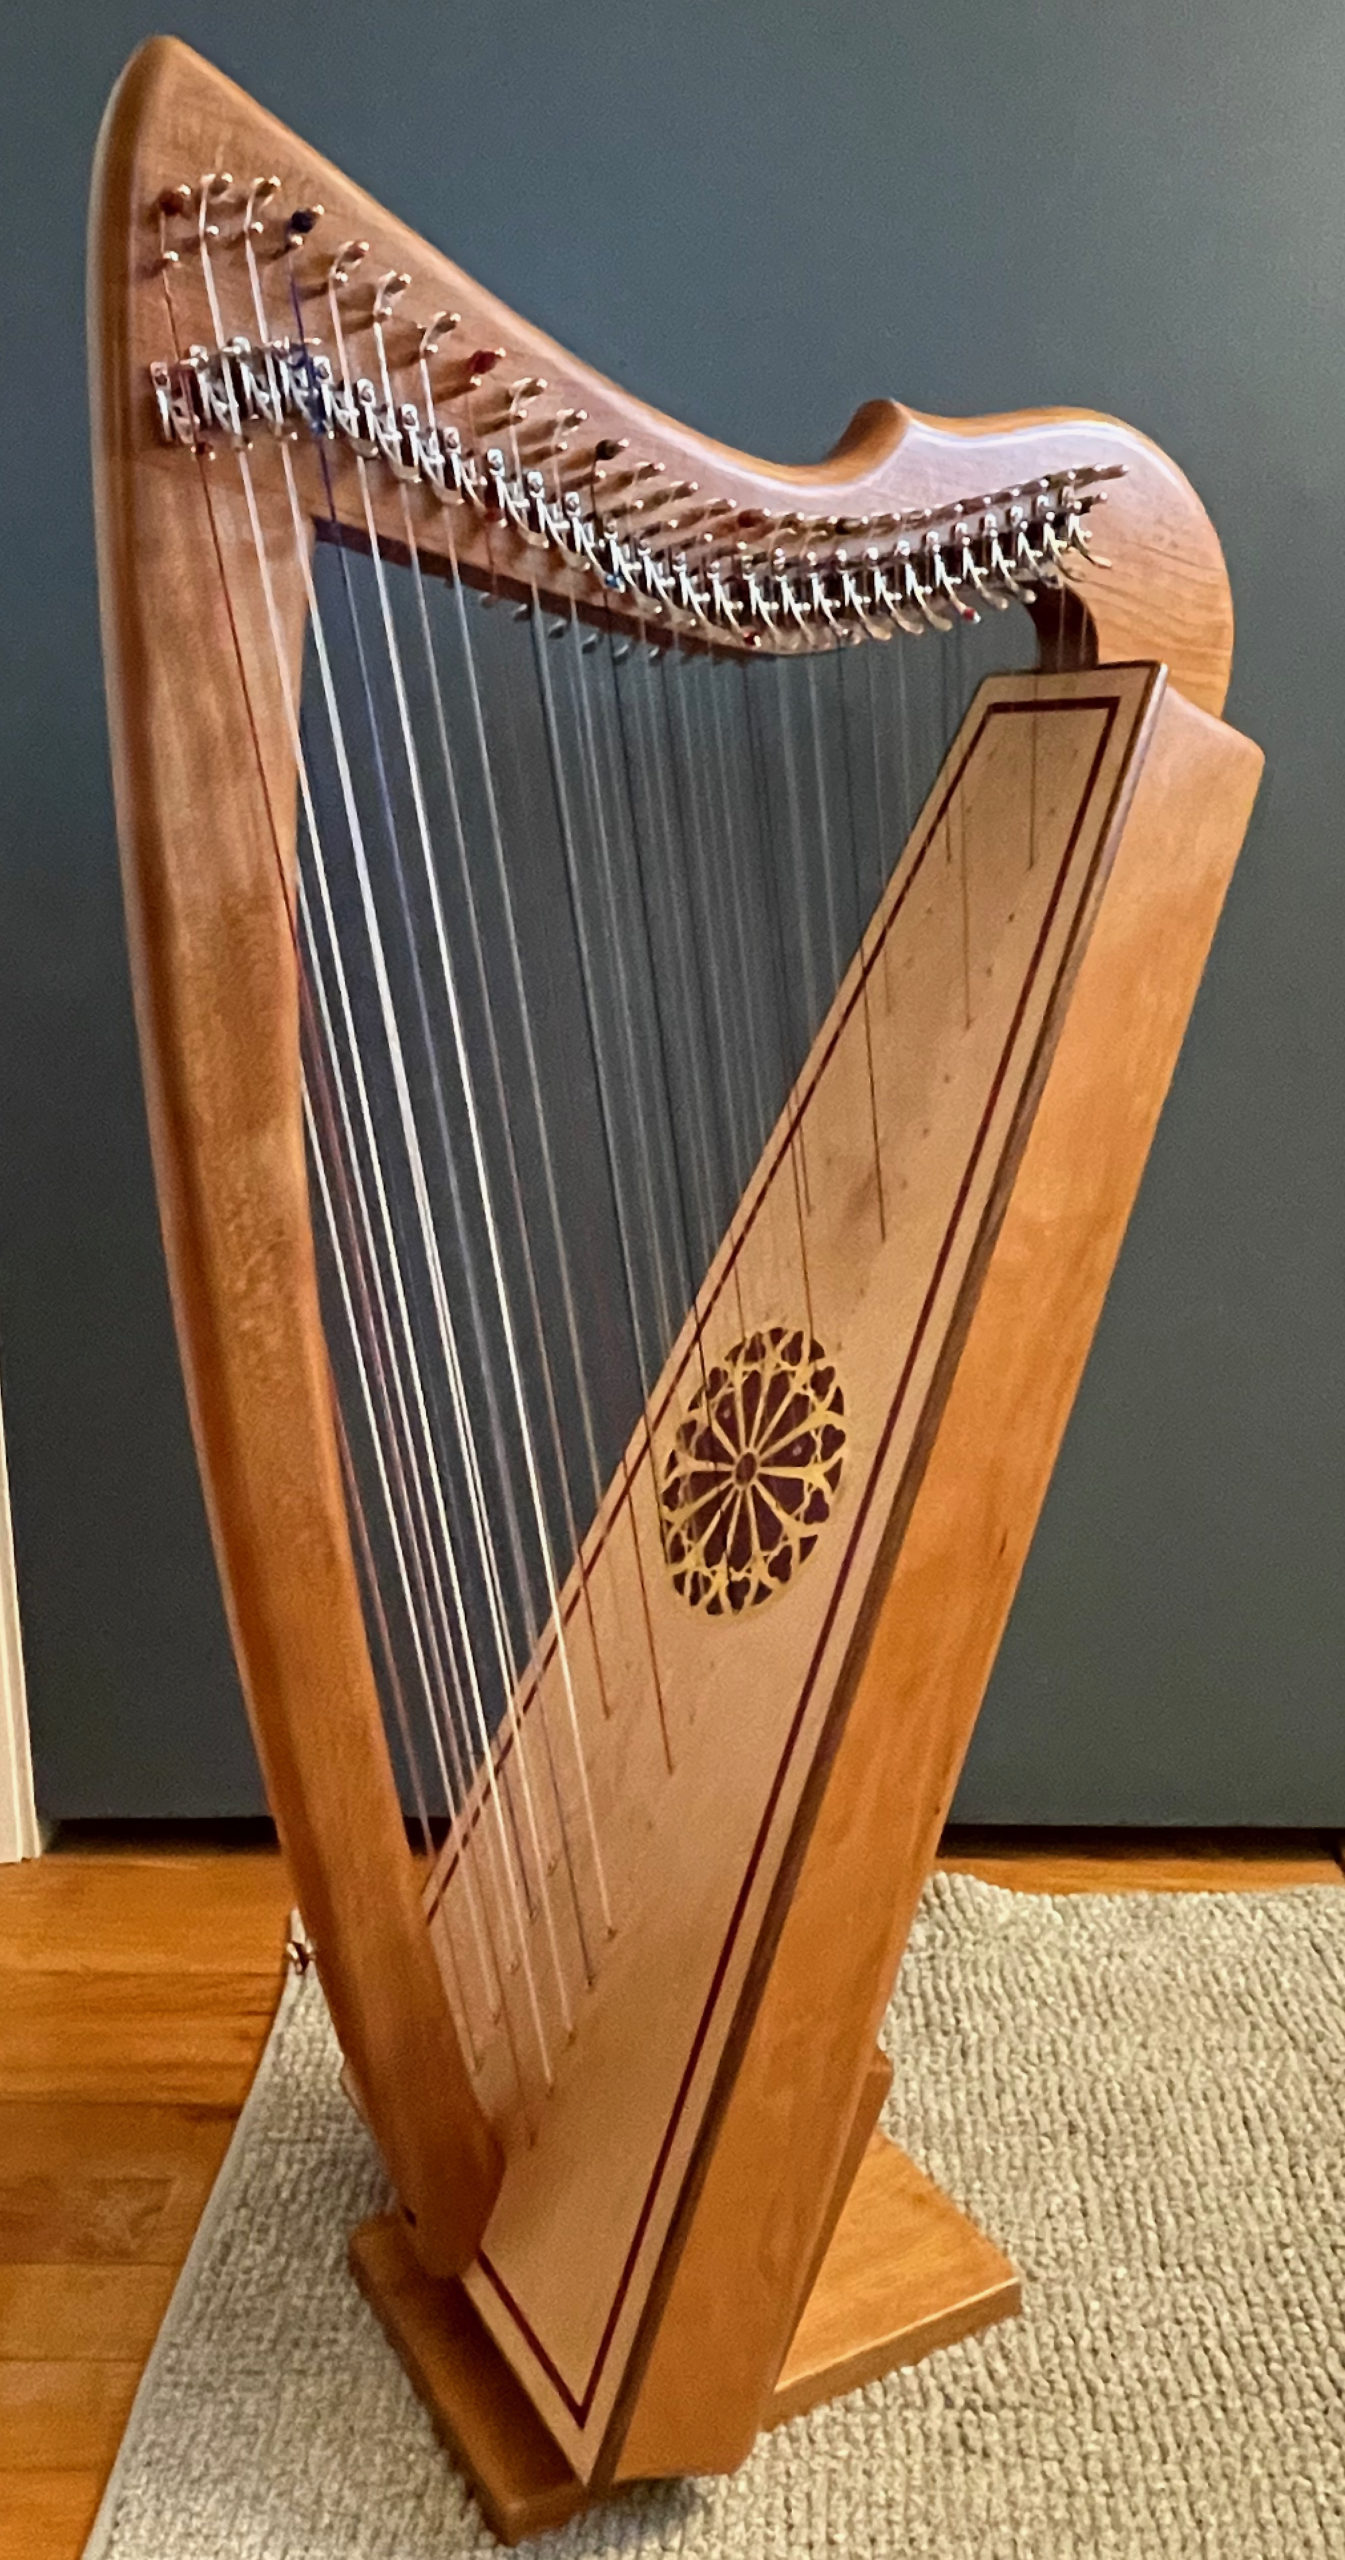 Rees Double Morgan Meghan double-strung harp from the left side